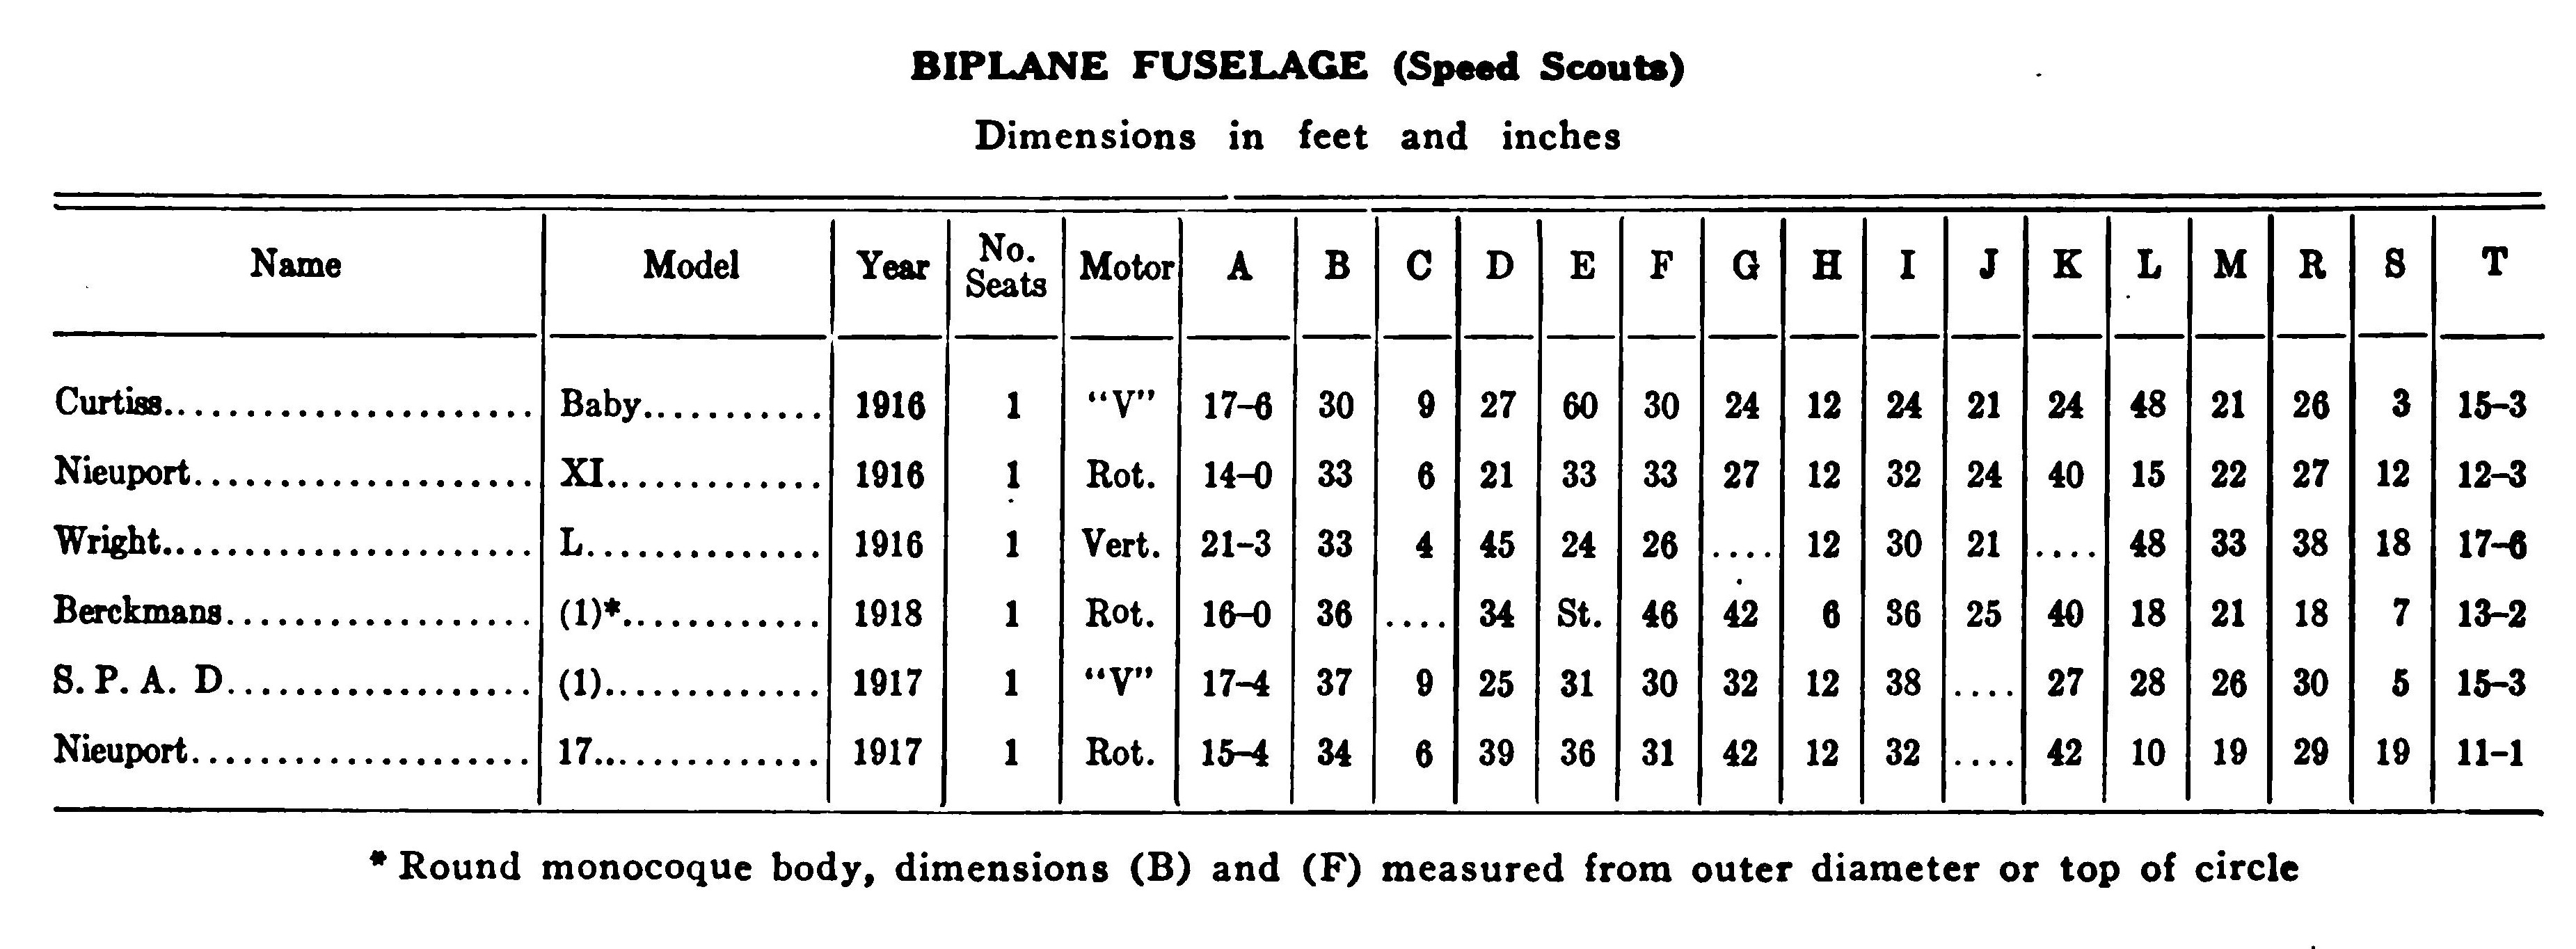 BIPLANE FUSELAGE TABLE (Speed Scouts)